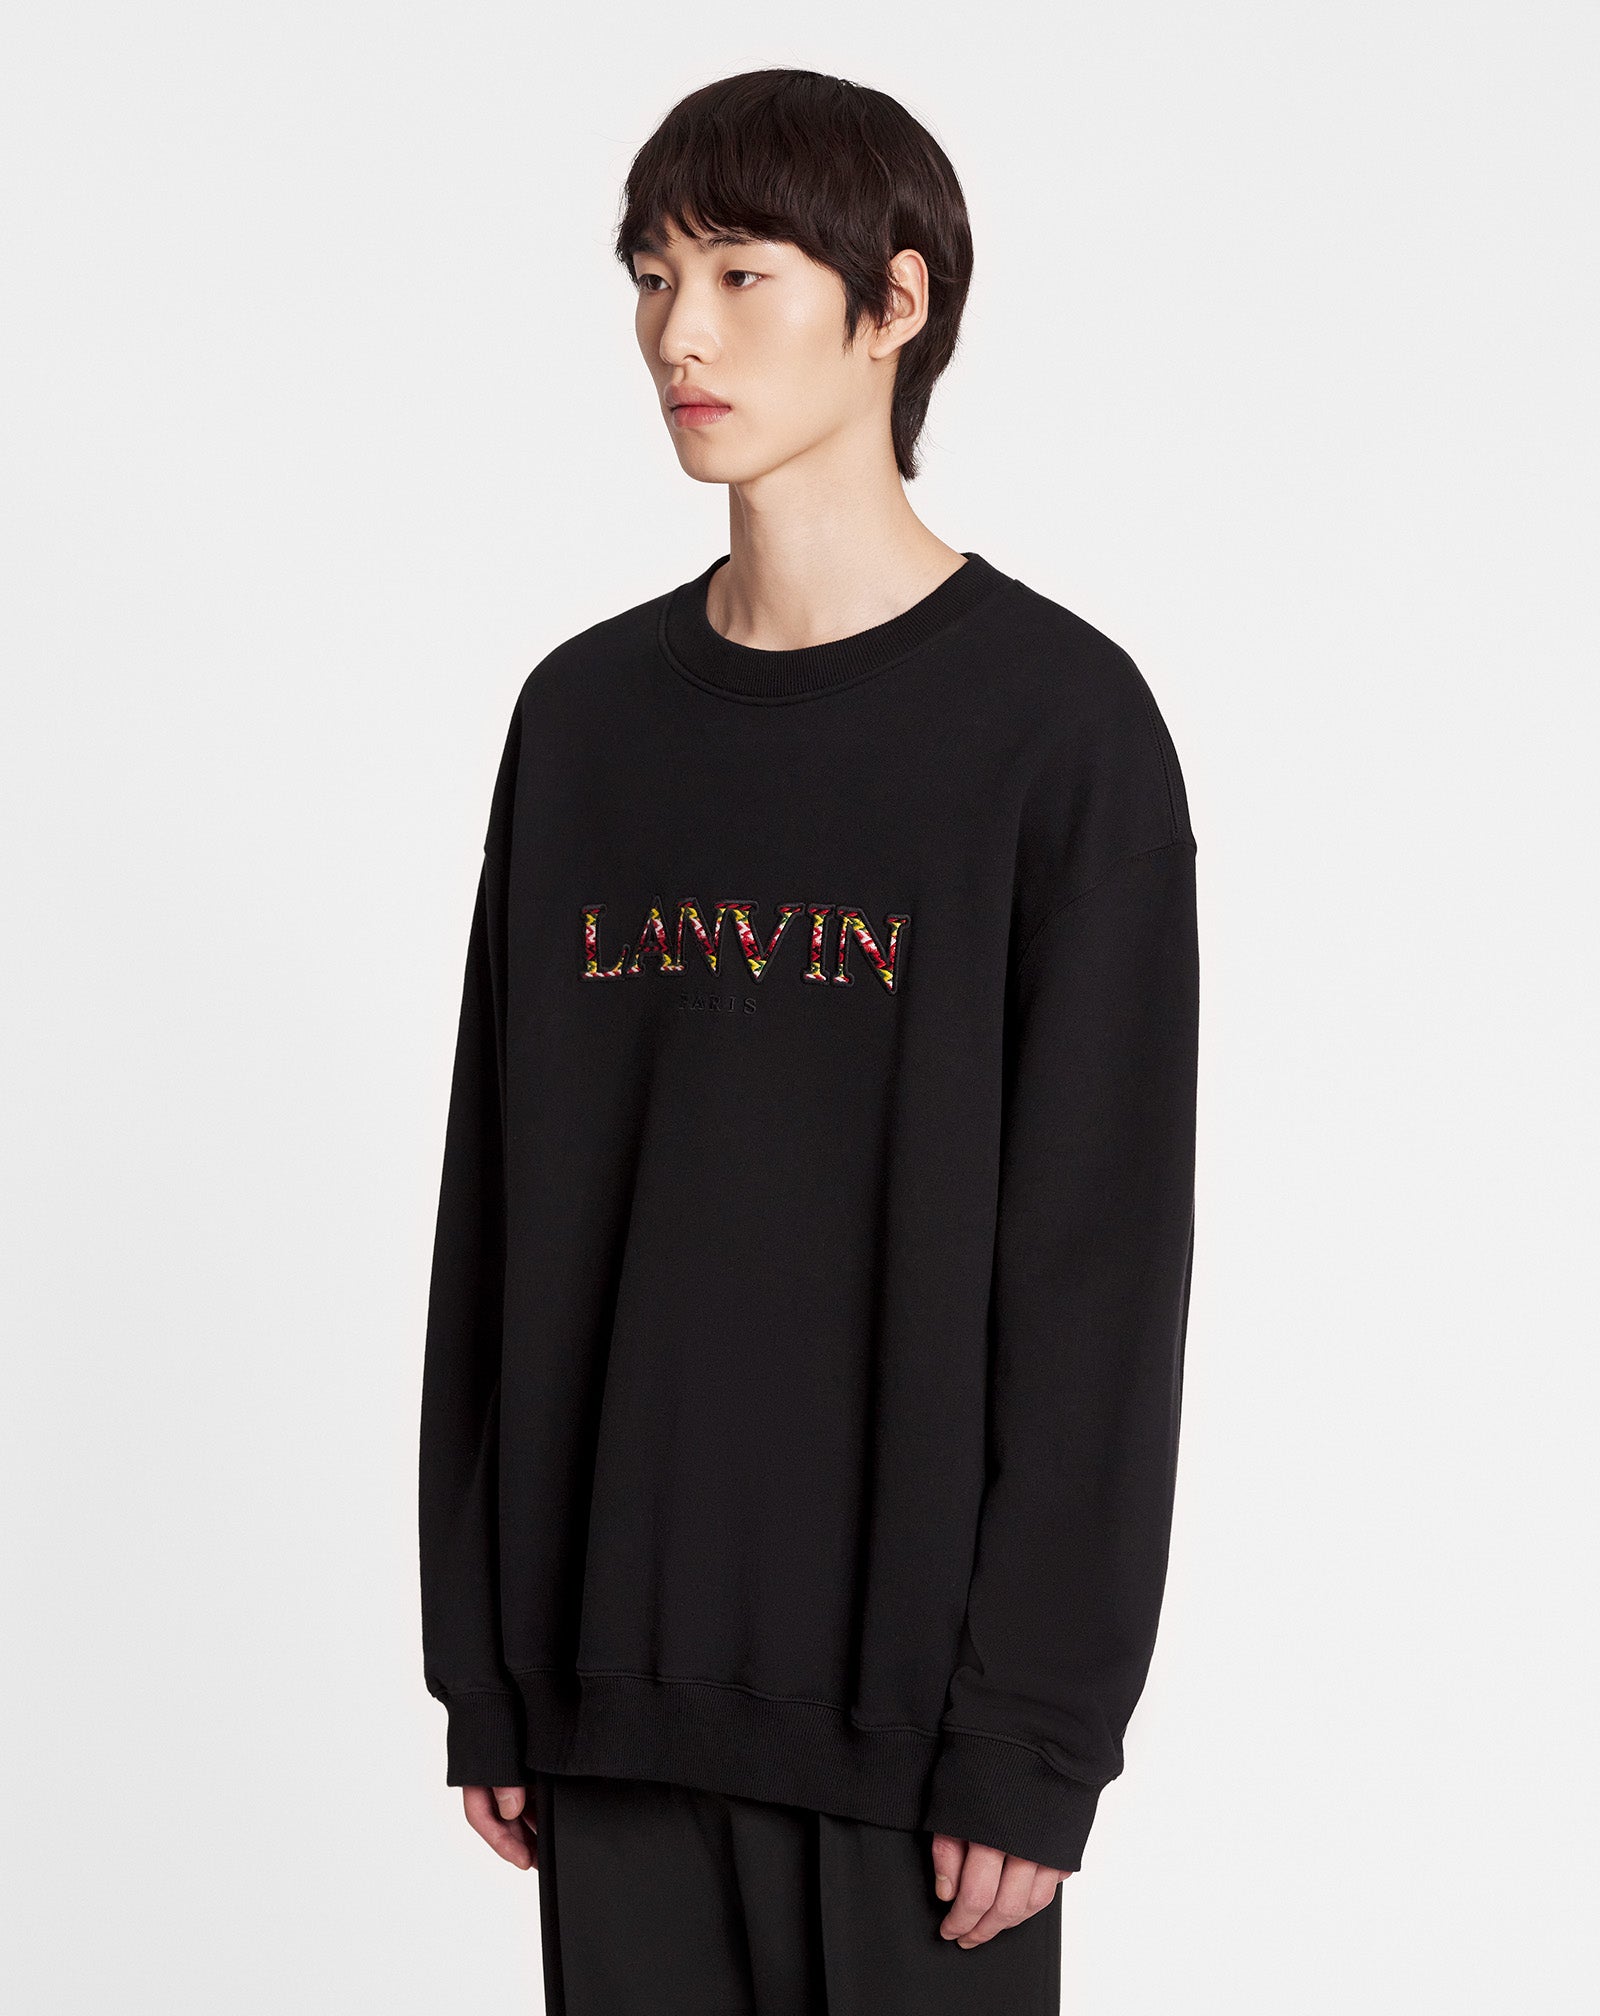 OVERSIZED EMBROIDERED LANVIN CURB SWEATSHIRT